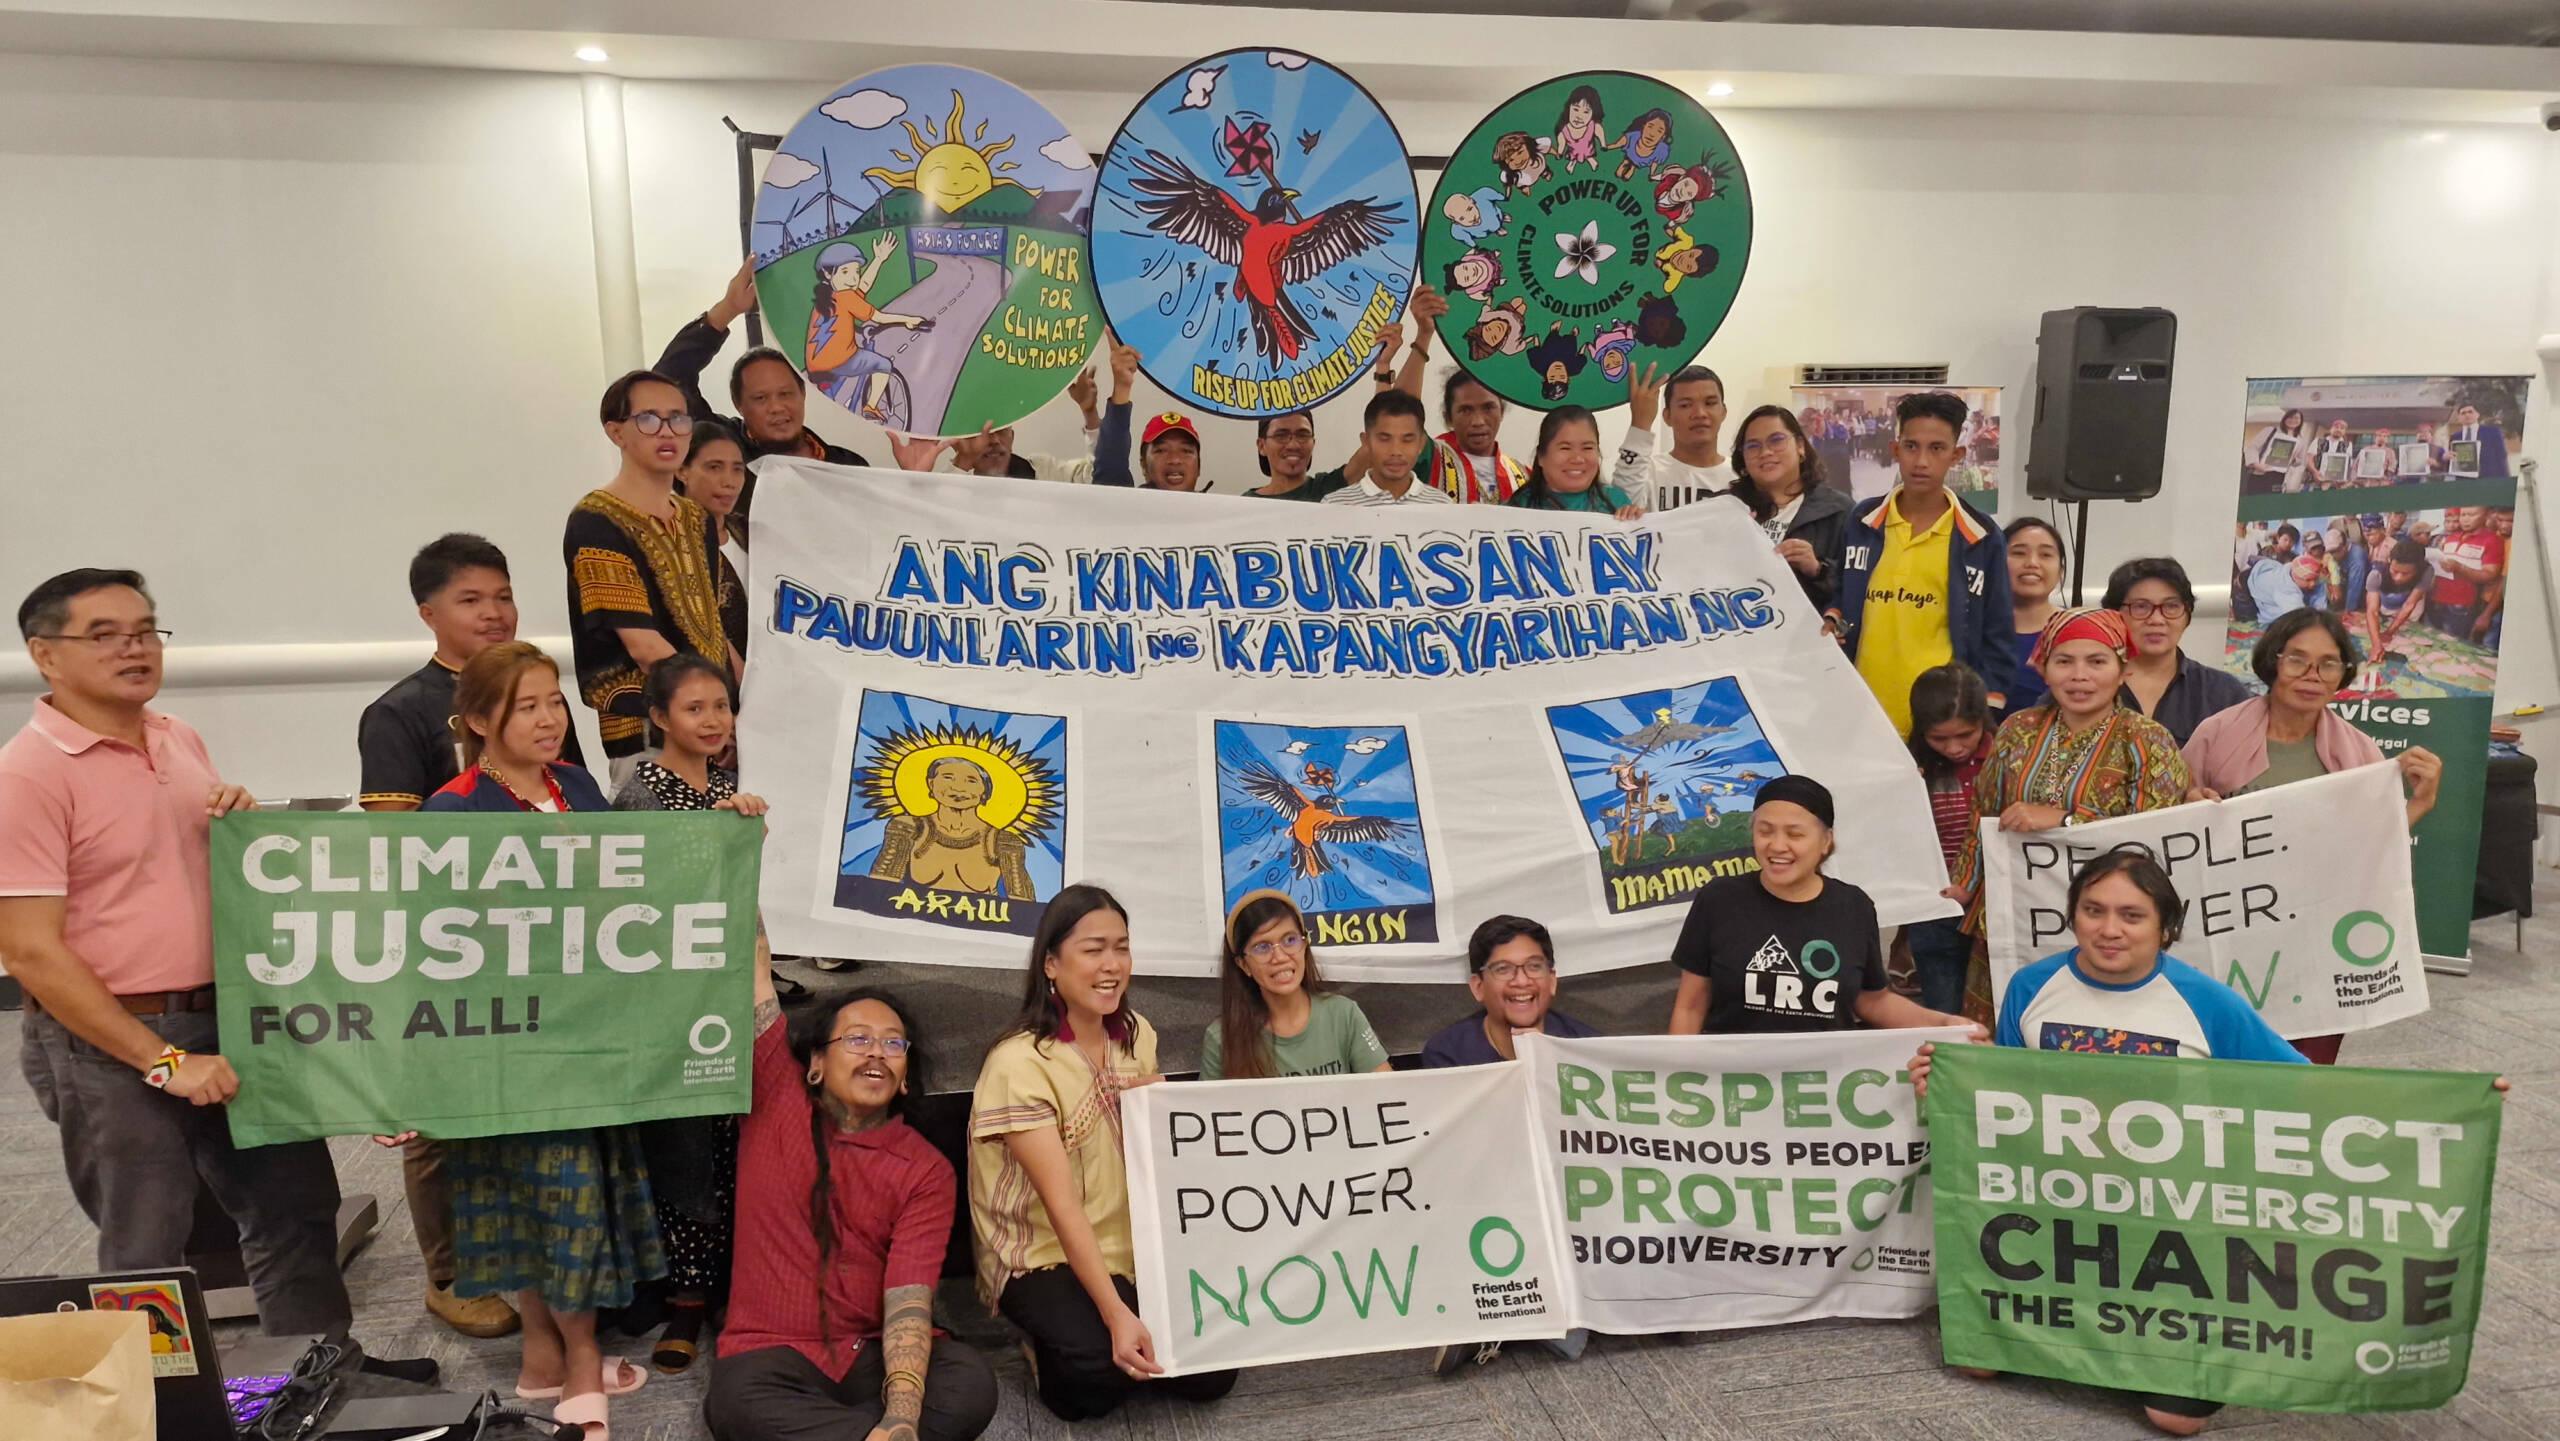 Quezon City, Philippines, December 5: as part of Power Up, the climate movement and Indigenous People organizations join together to discuss how the protection of Indigenous People's rights helps contribute to addressing the climate emergency. Photo credit: Ara Alejo